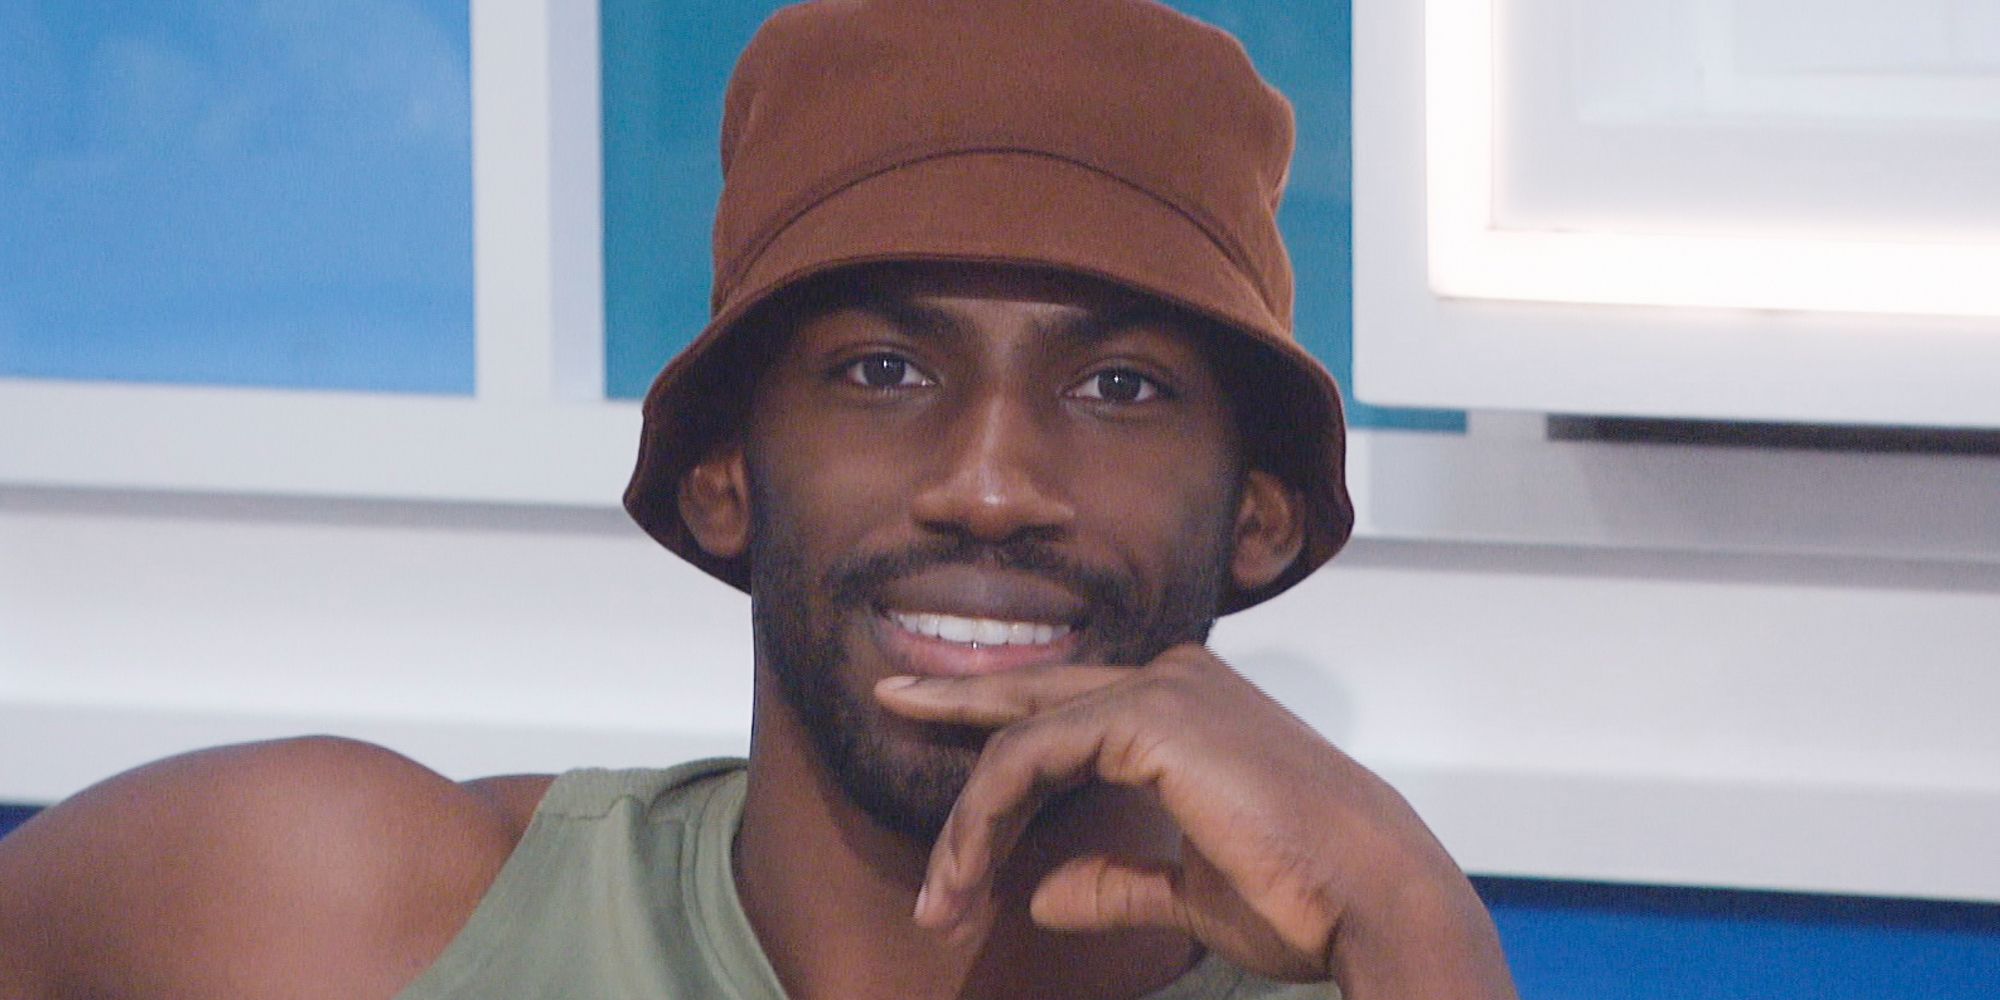 Xavier Prather smiling for the cameras in Big Brother 23 wearing a bucket hat